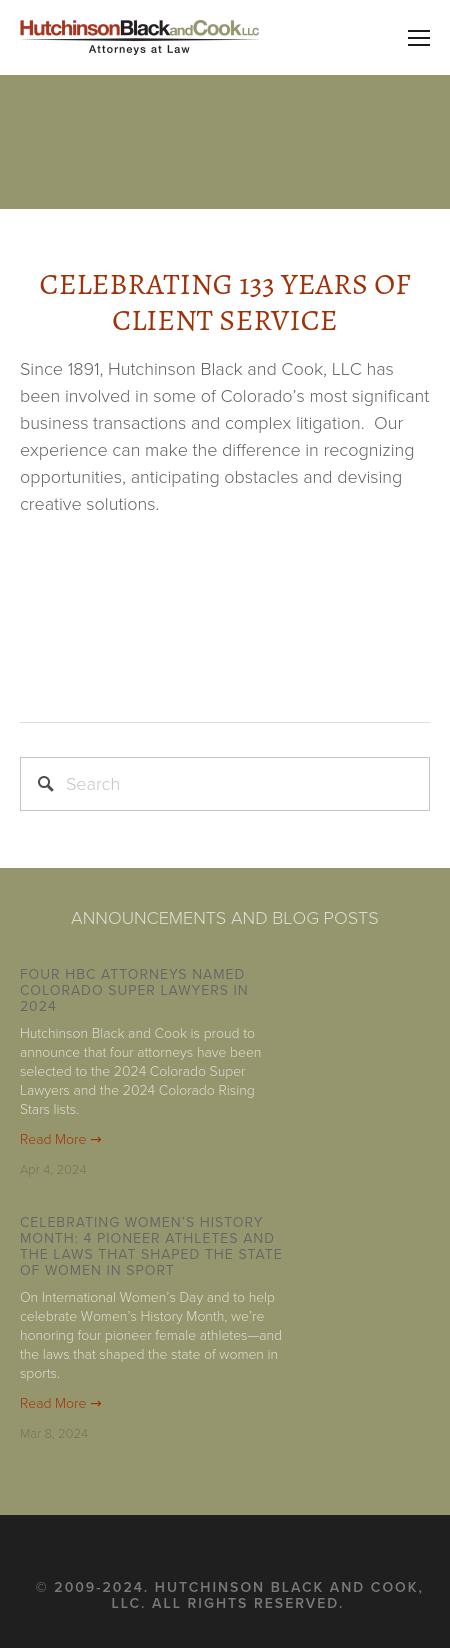 Hutchinson Black And Cook LLC - Boulder CO Lawyers